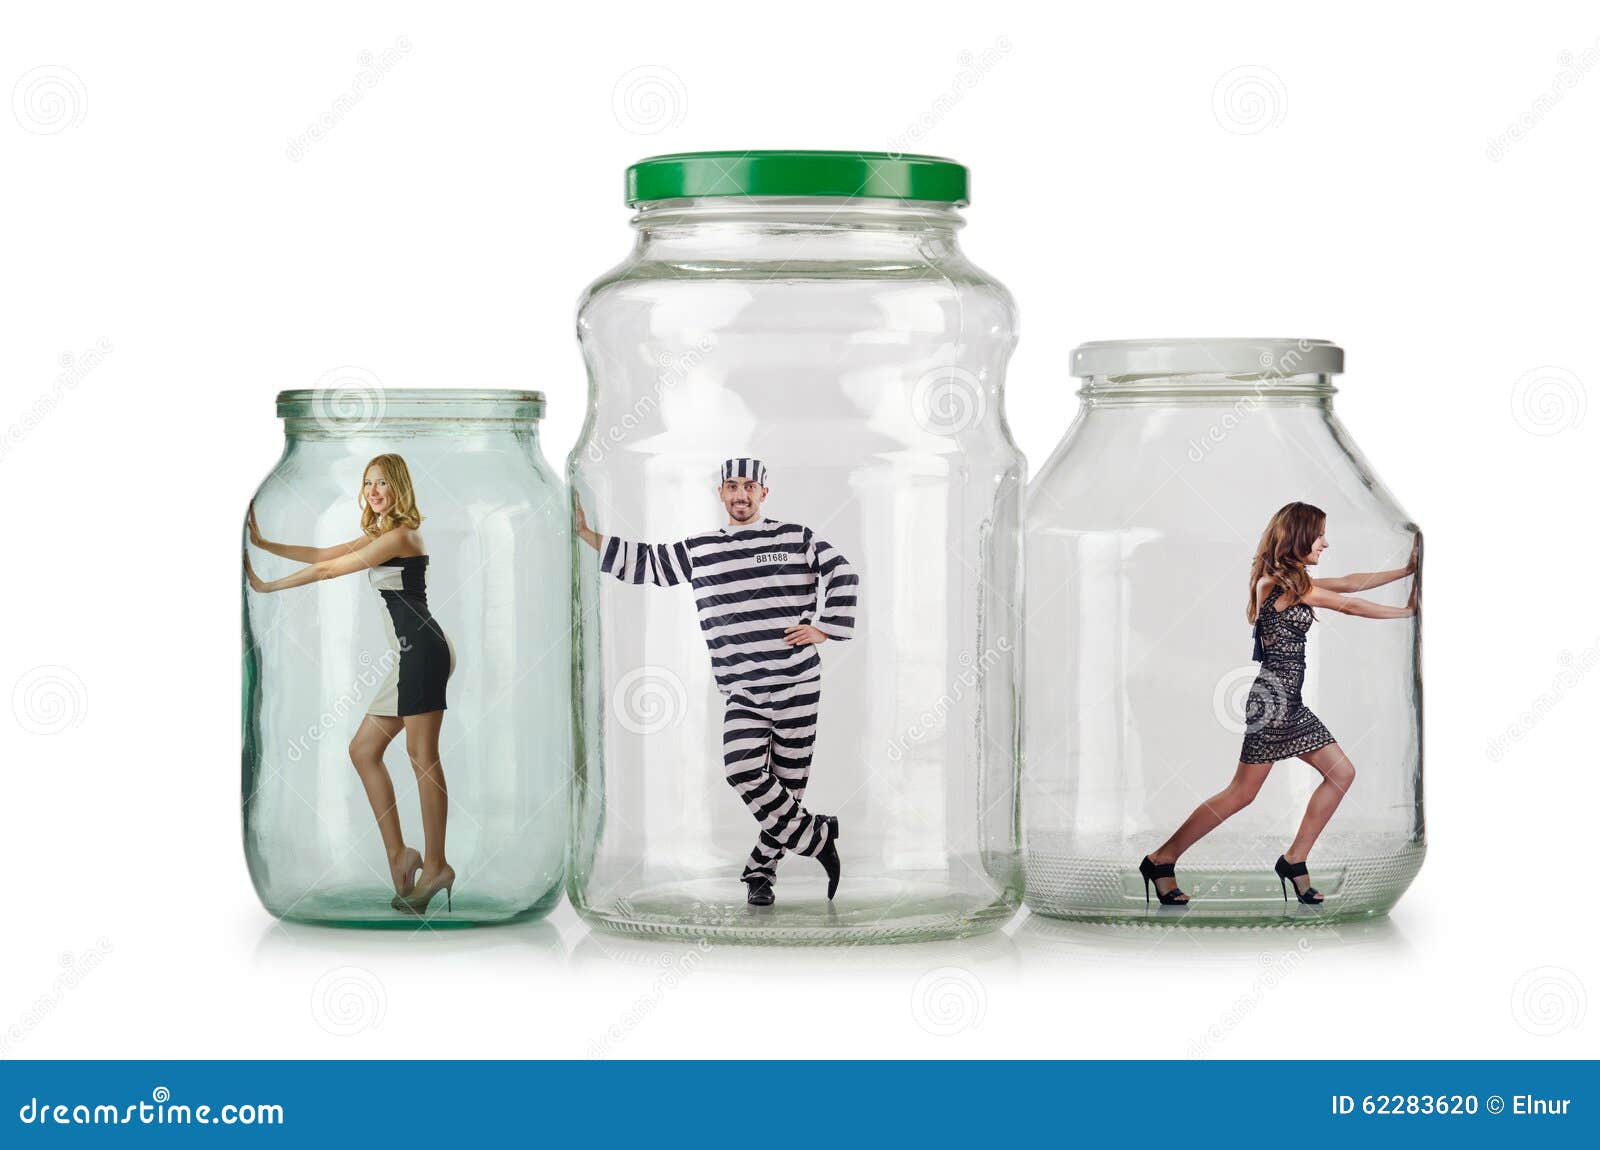 The people trapped in the glass jar